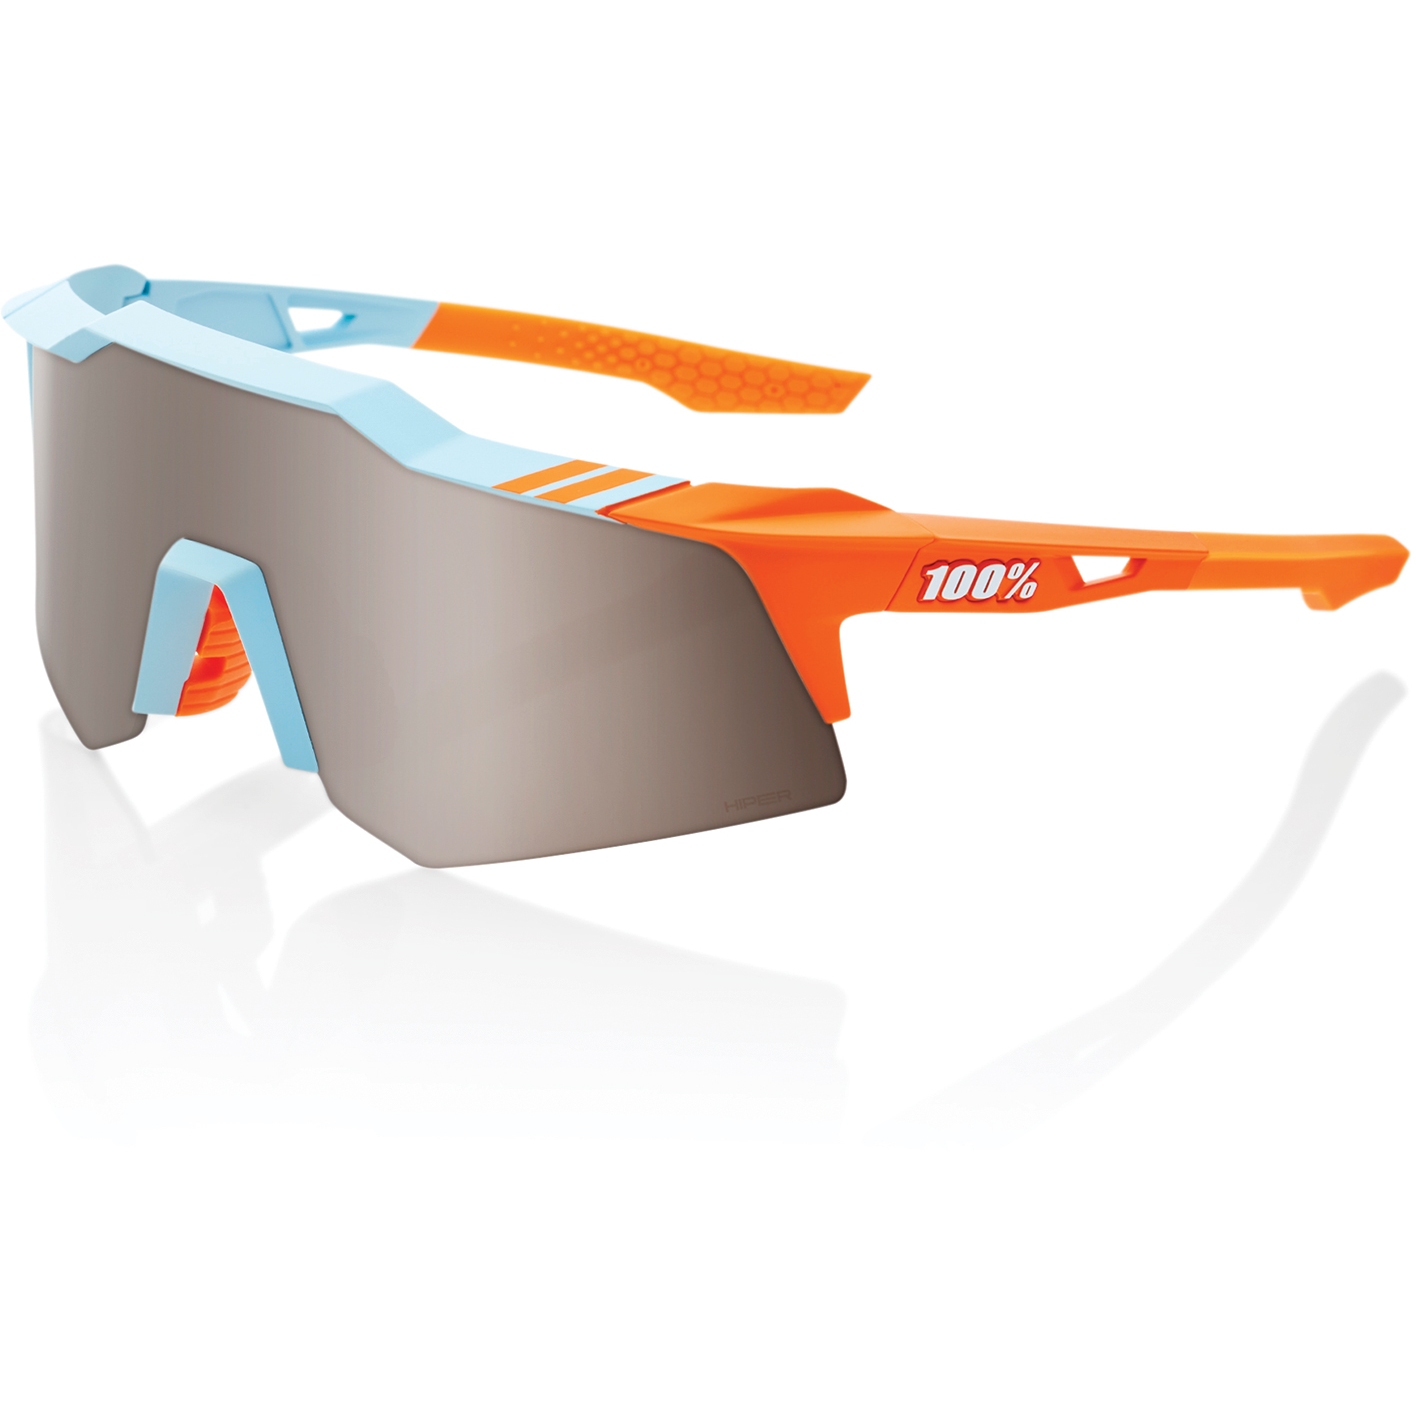 Productfoto van 100% Speedcraft XS Glasses - HiPER Mirror Lens - Soft Tact Two Tone / Silver + Clear